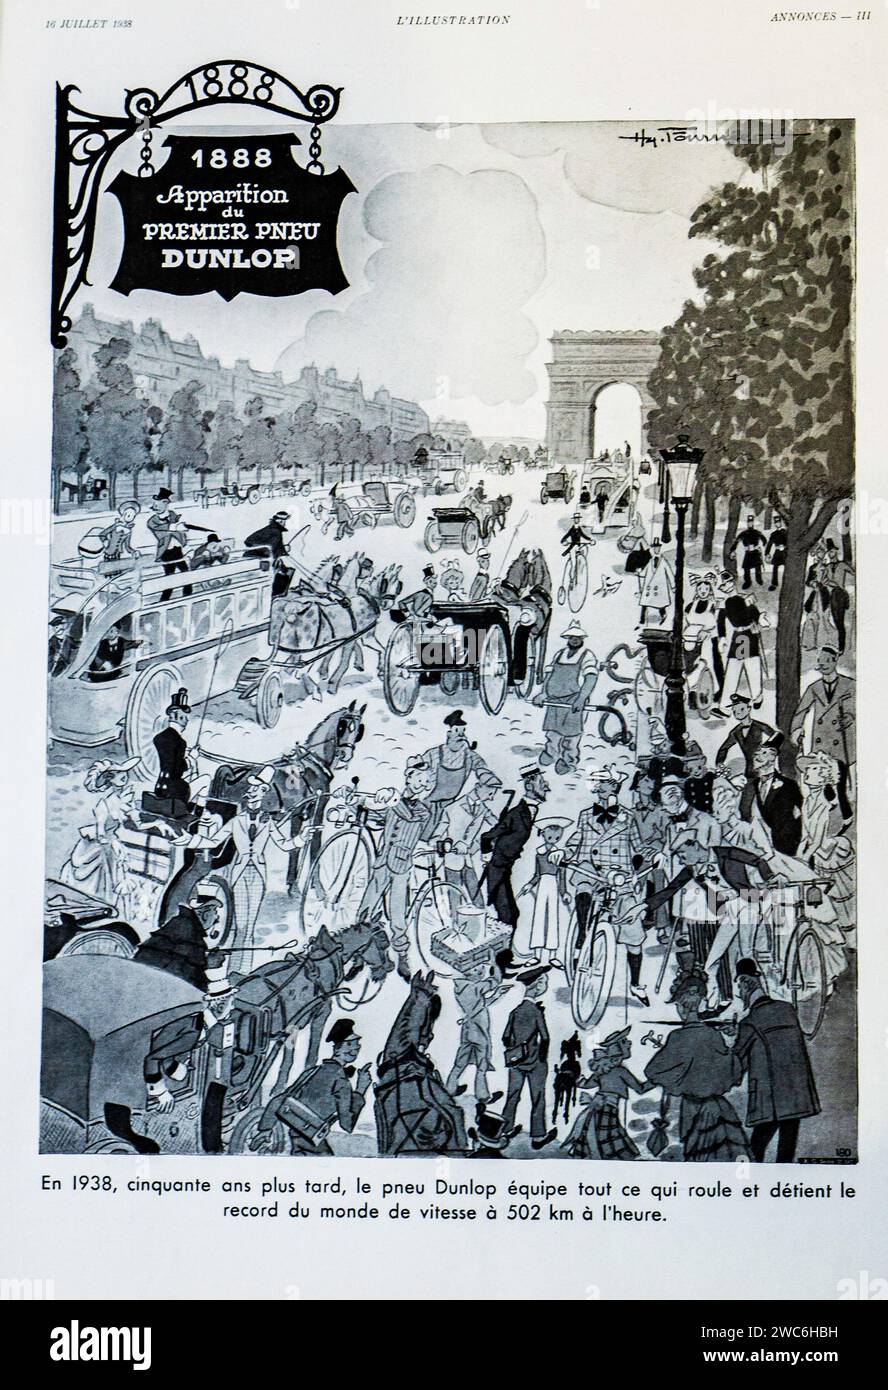 An intricate 19th-century illustration captures the historic moment of the debut of Dunlops pneumatic tire amidst the lively thoroughfare of Paris near the Arc de Triomphe, showcasing various modes of transportation. Stock Photo